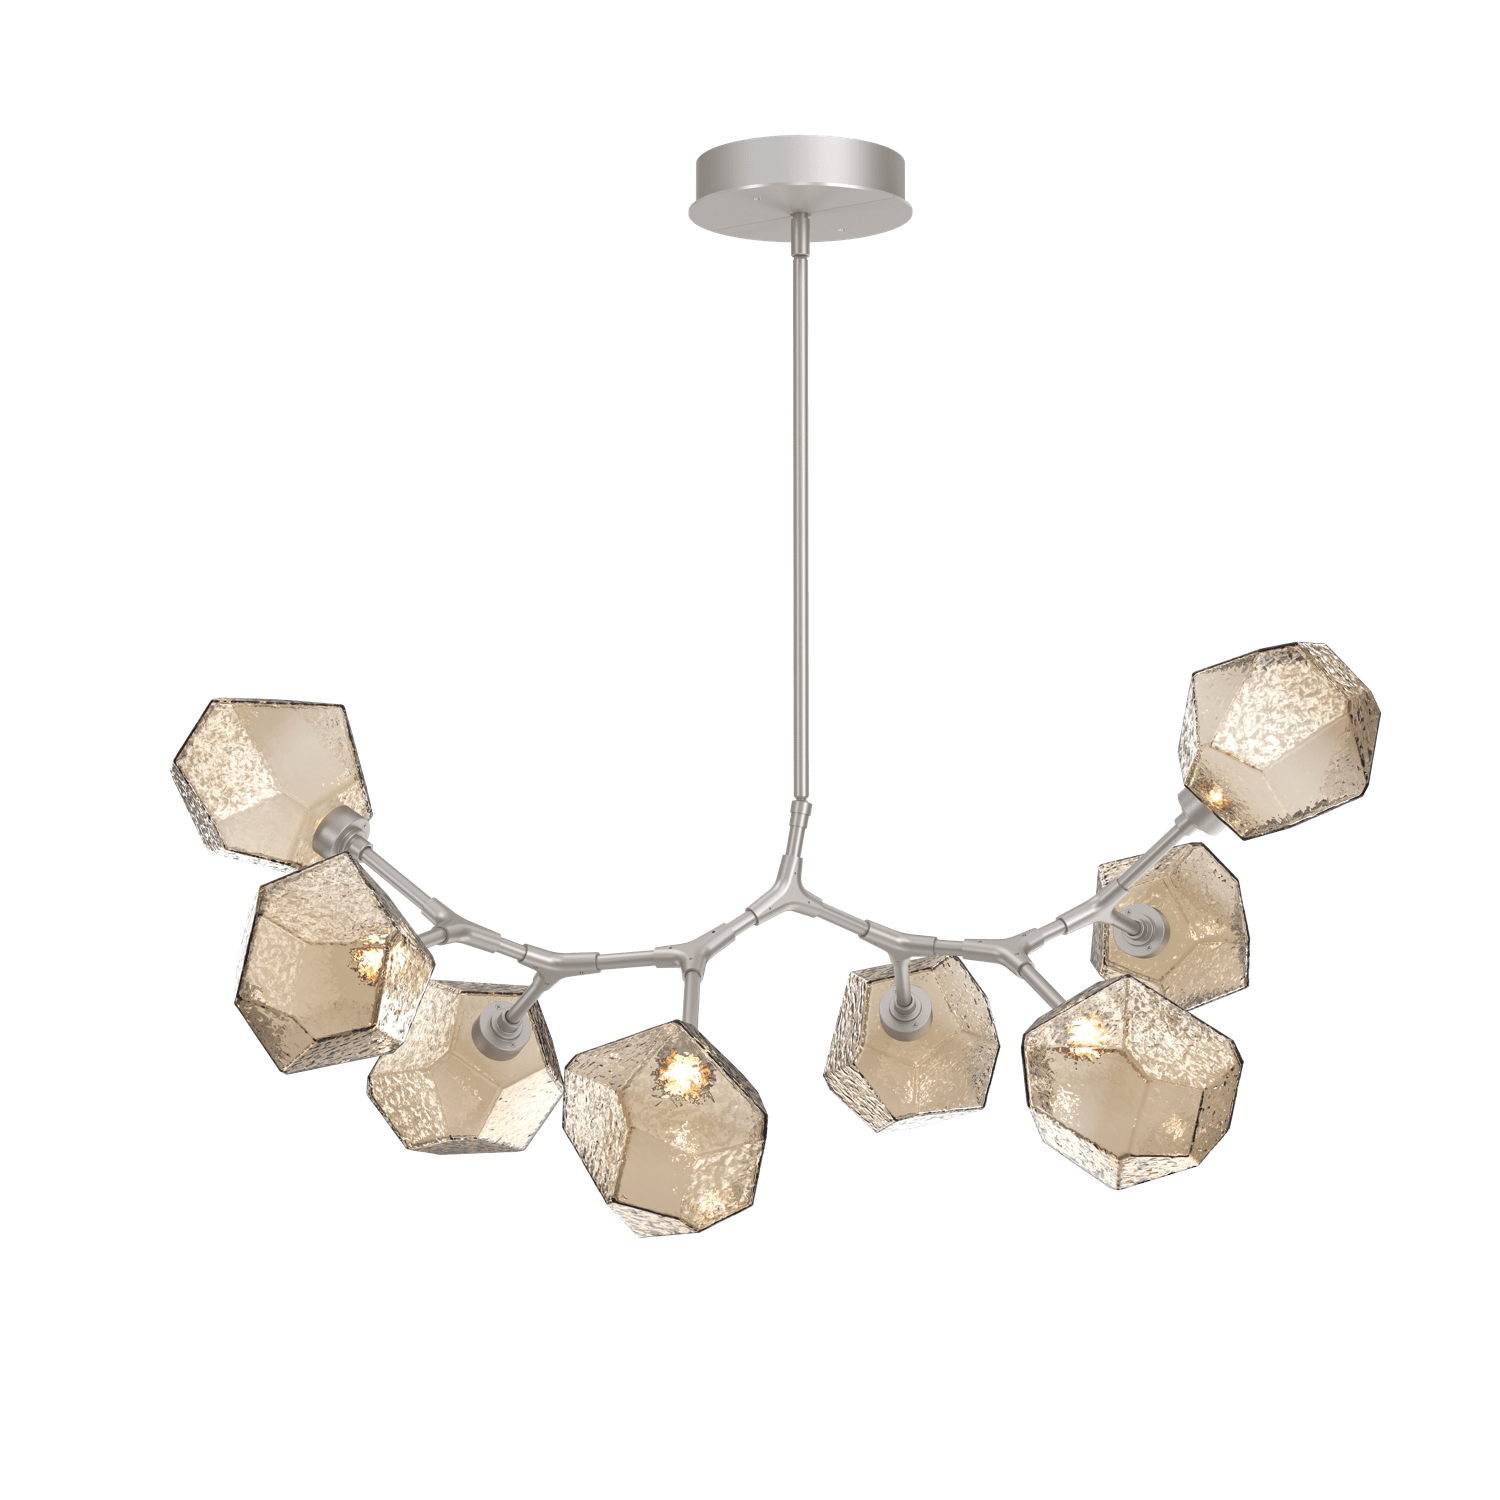 PLB0039-BB-BS-B-Hammerton-Studio-Gem-8-light-modern-branch-chandelier-with-metallic-beige-silver-finish-and-bronze-blown-glass-shades-and-LED-lamping